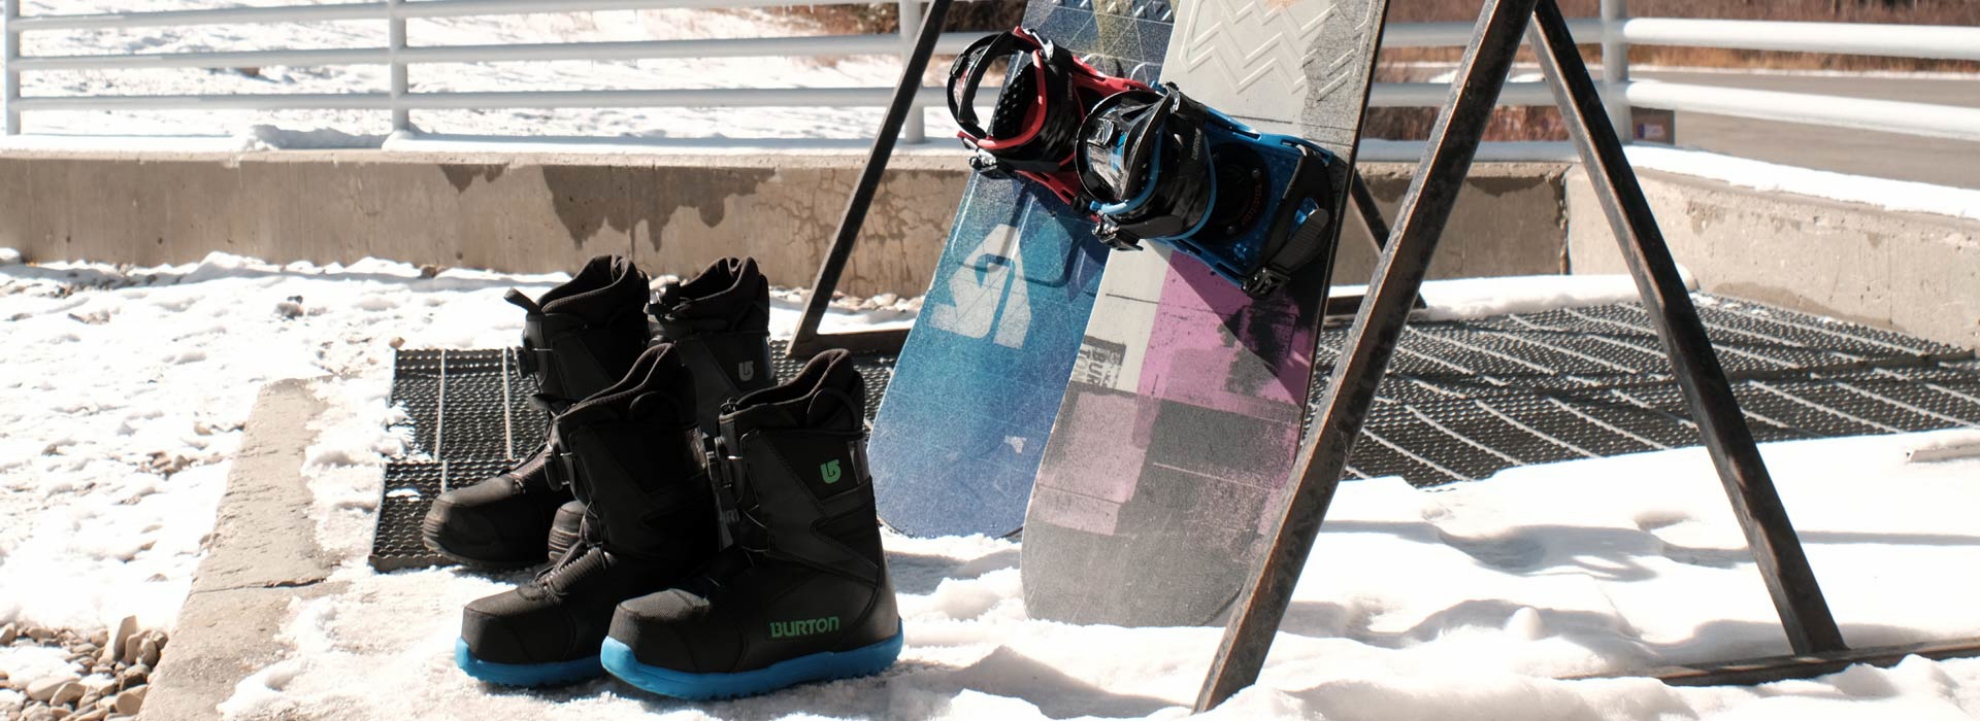 Snowboard and boots leaning against a ski rack